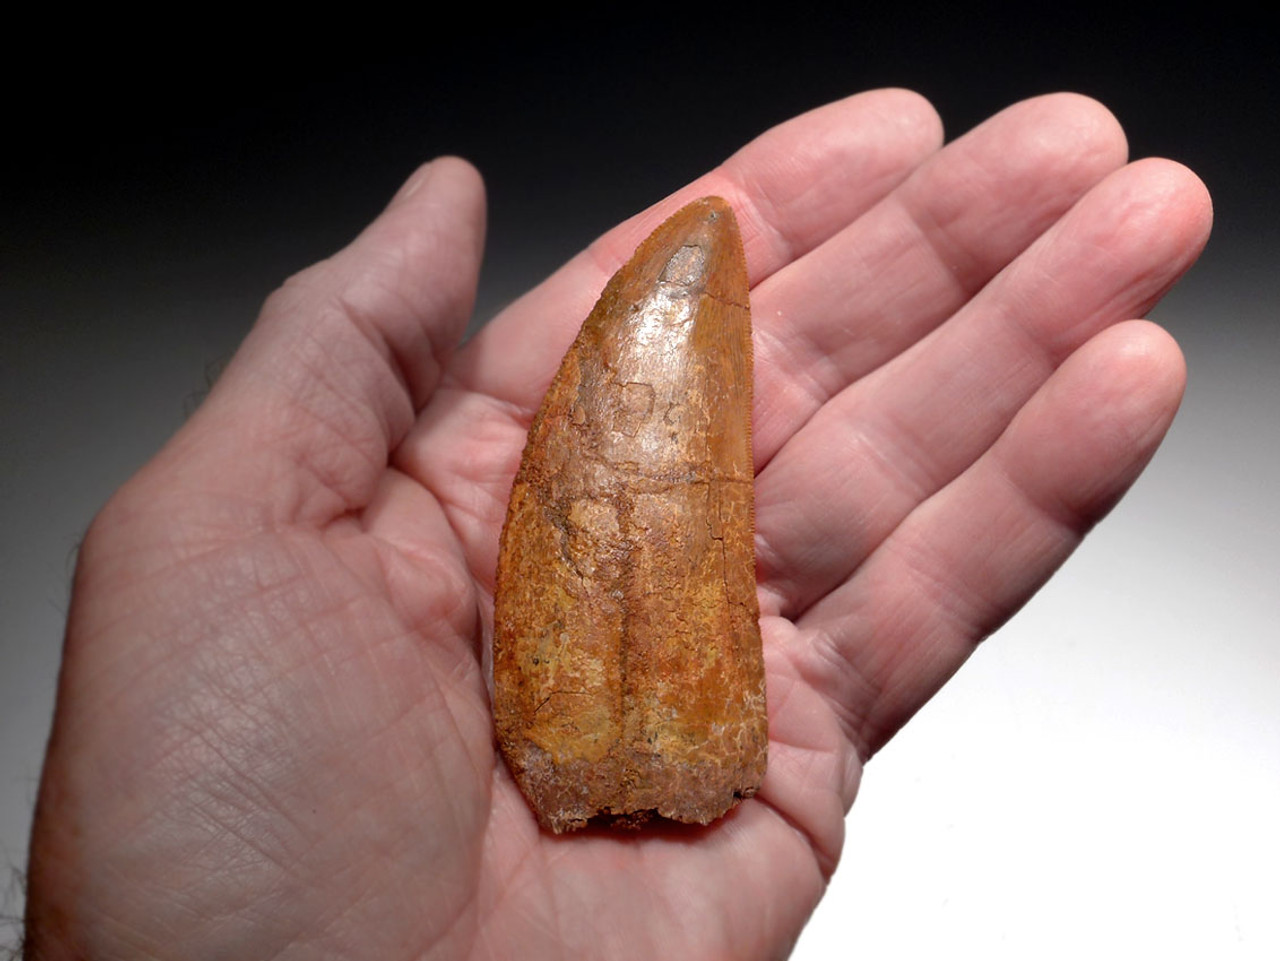 HUGE 3.7 INCH FOSSIL DINOSAUR TOOTH FROM MEAT-EATING CARCHARODONTOSAURUS  *DT2-104